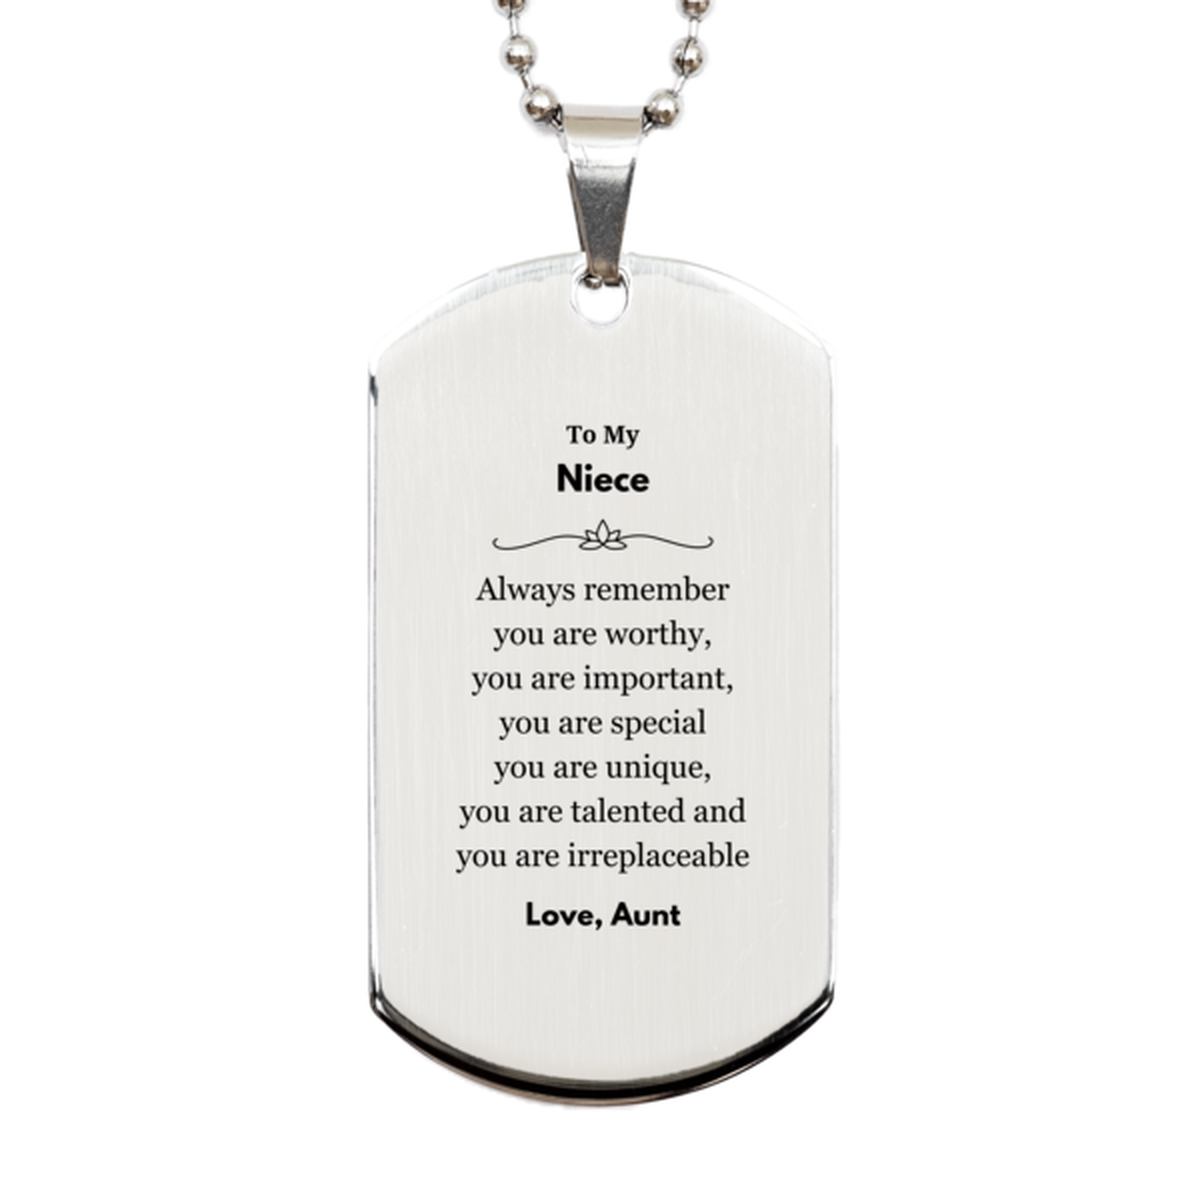 Niece Birthday Gifts from Aunt, Inspirational Silver Dog Tag for Niece Christmas Graduation Gifts for Niece Always remember you are worthy, you are important. Love, Aunt